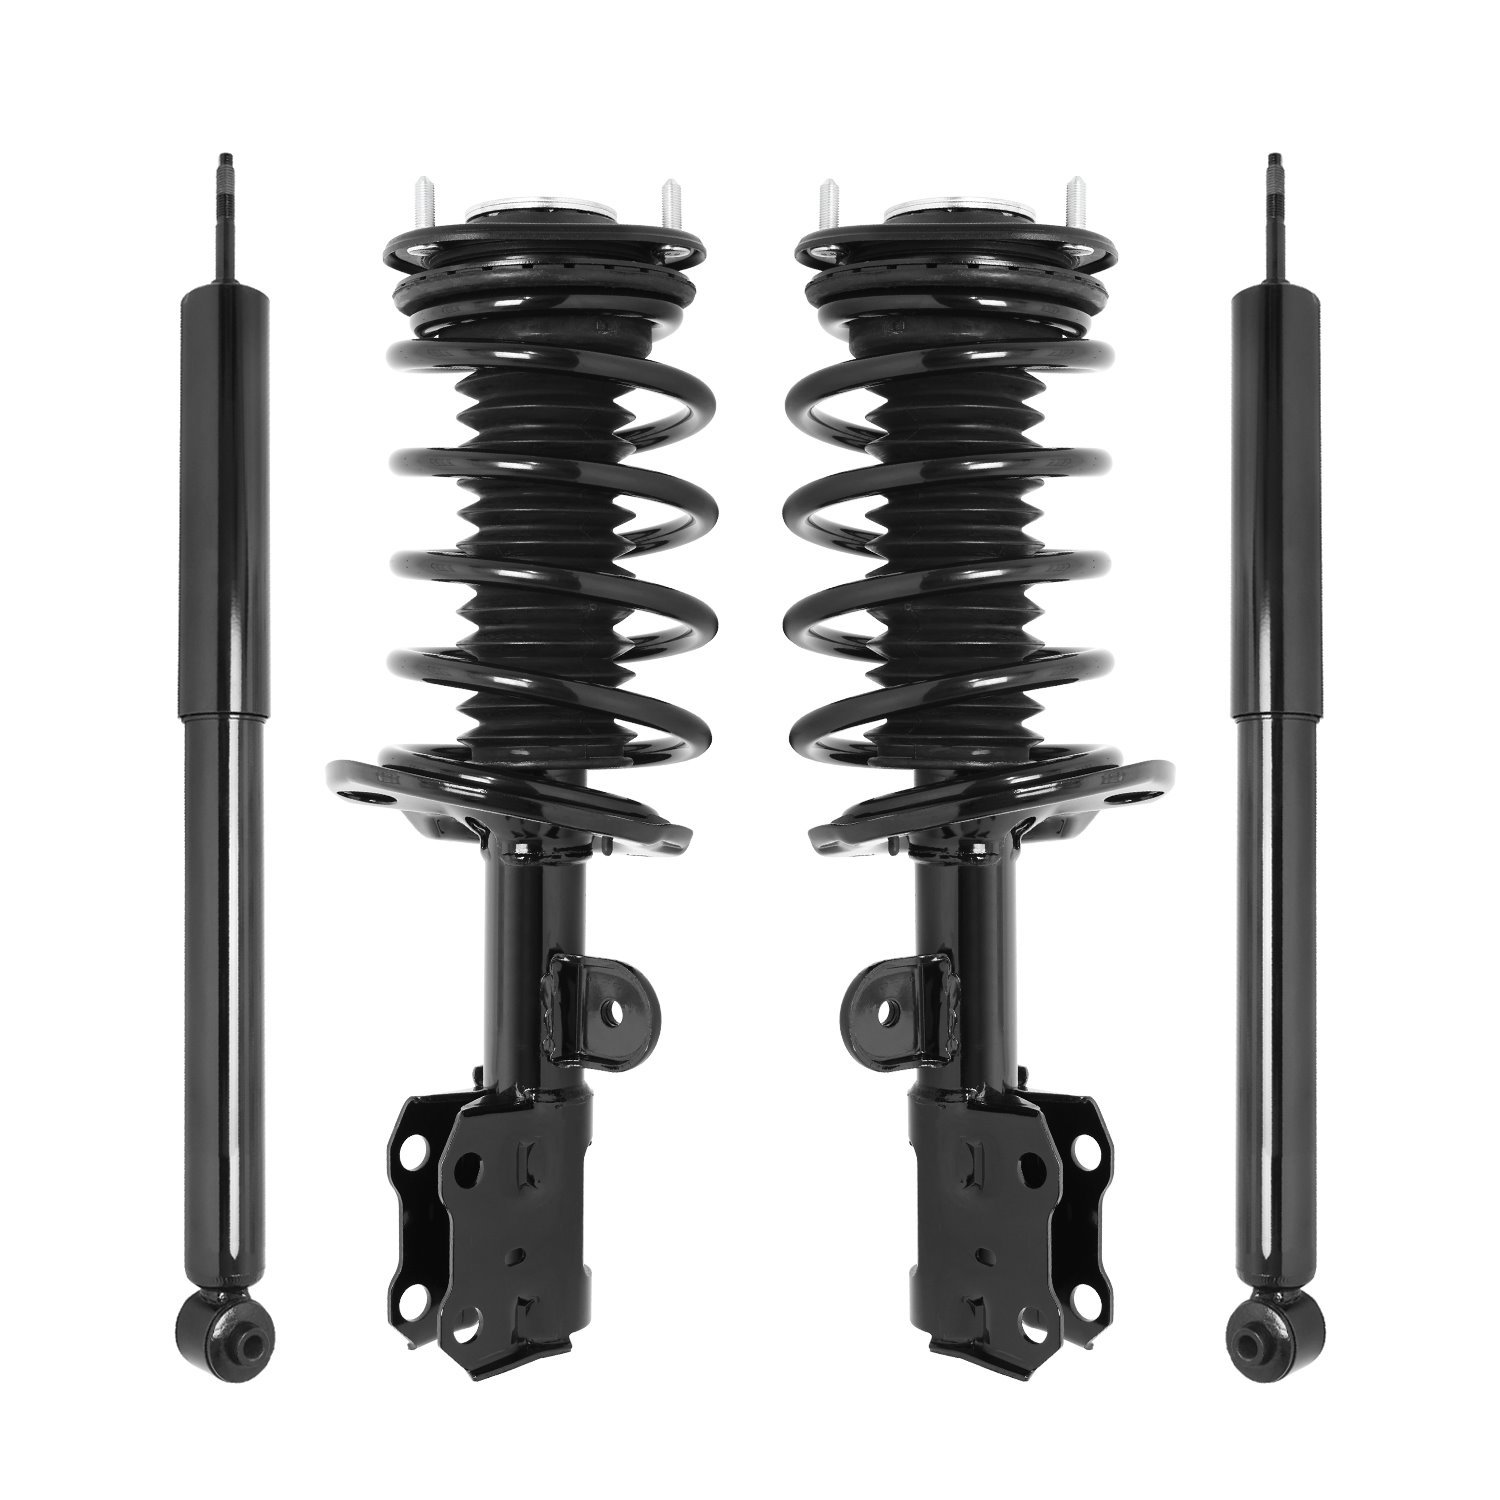 4-11106-254110-001 Front & Rear Suspension Strut & Coil Spring Assembly Fits Select Toyota Prius, Toyota Prius Plug-In